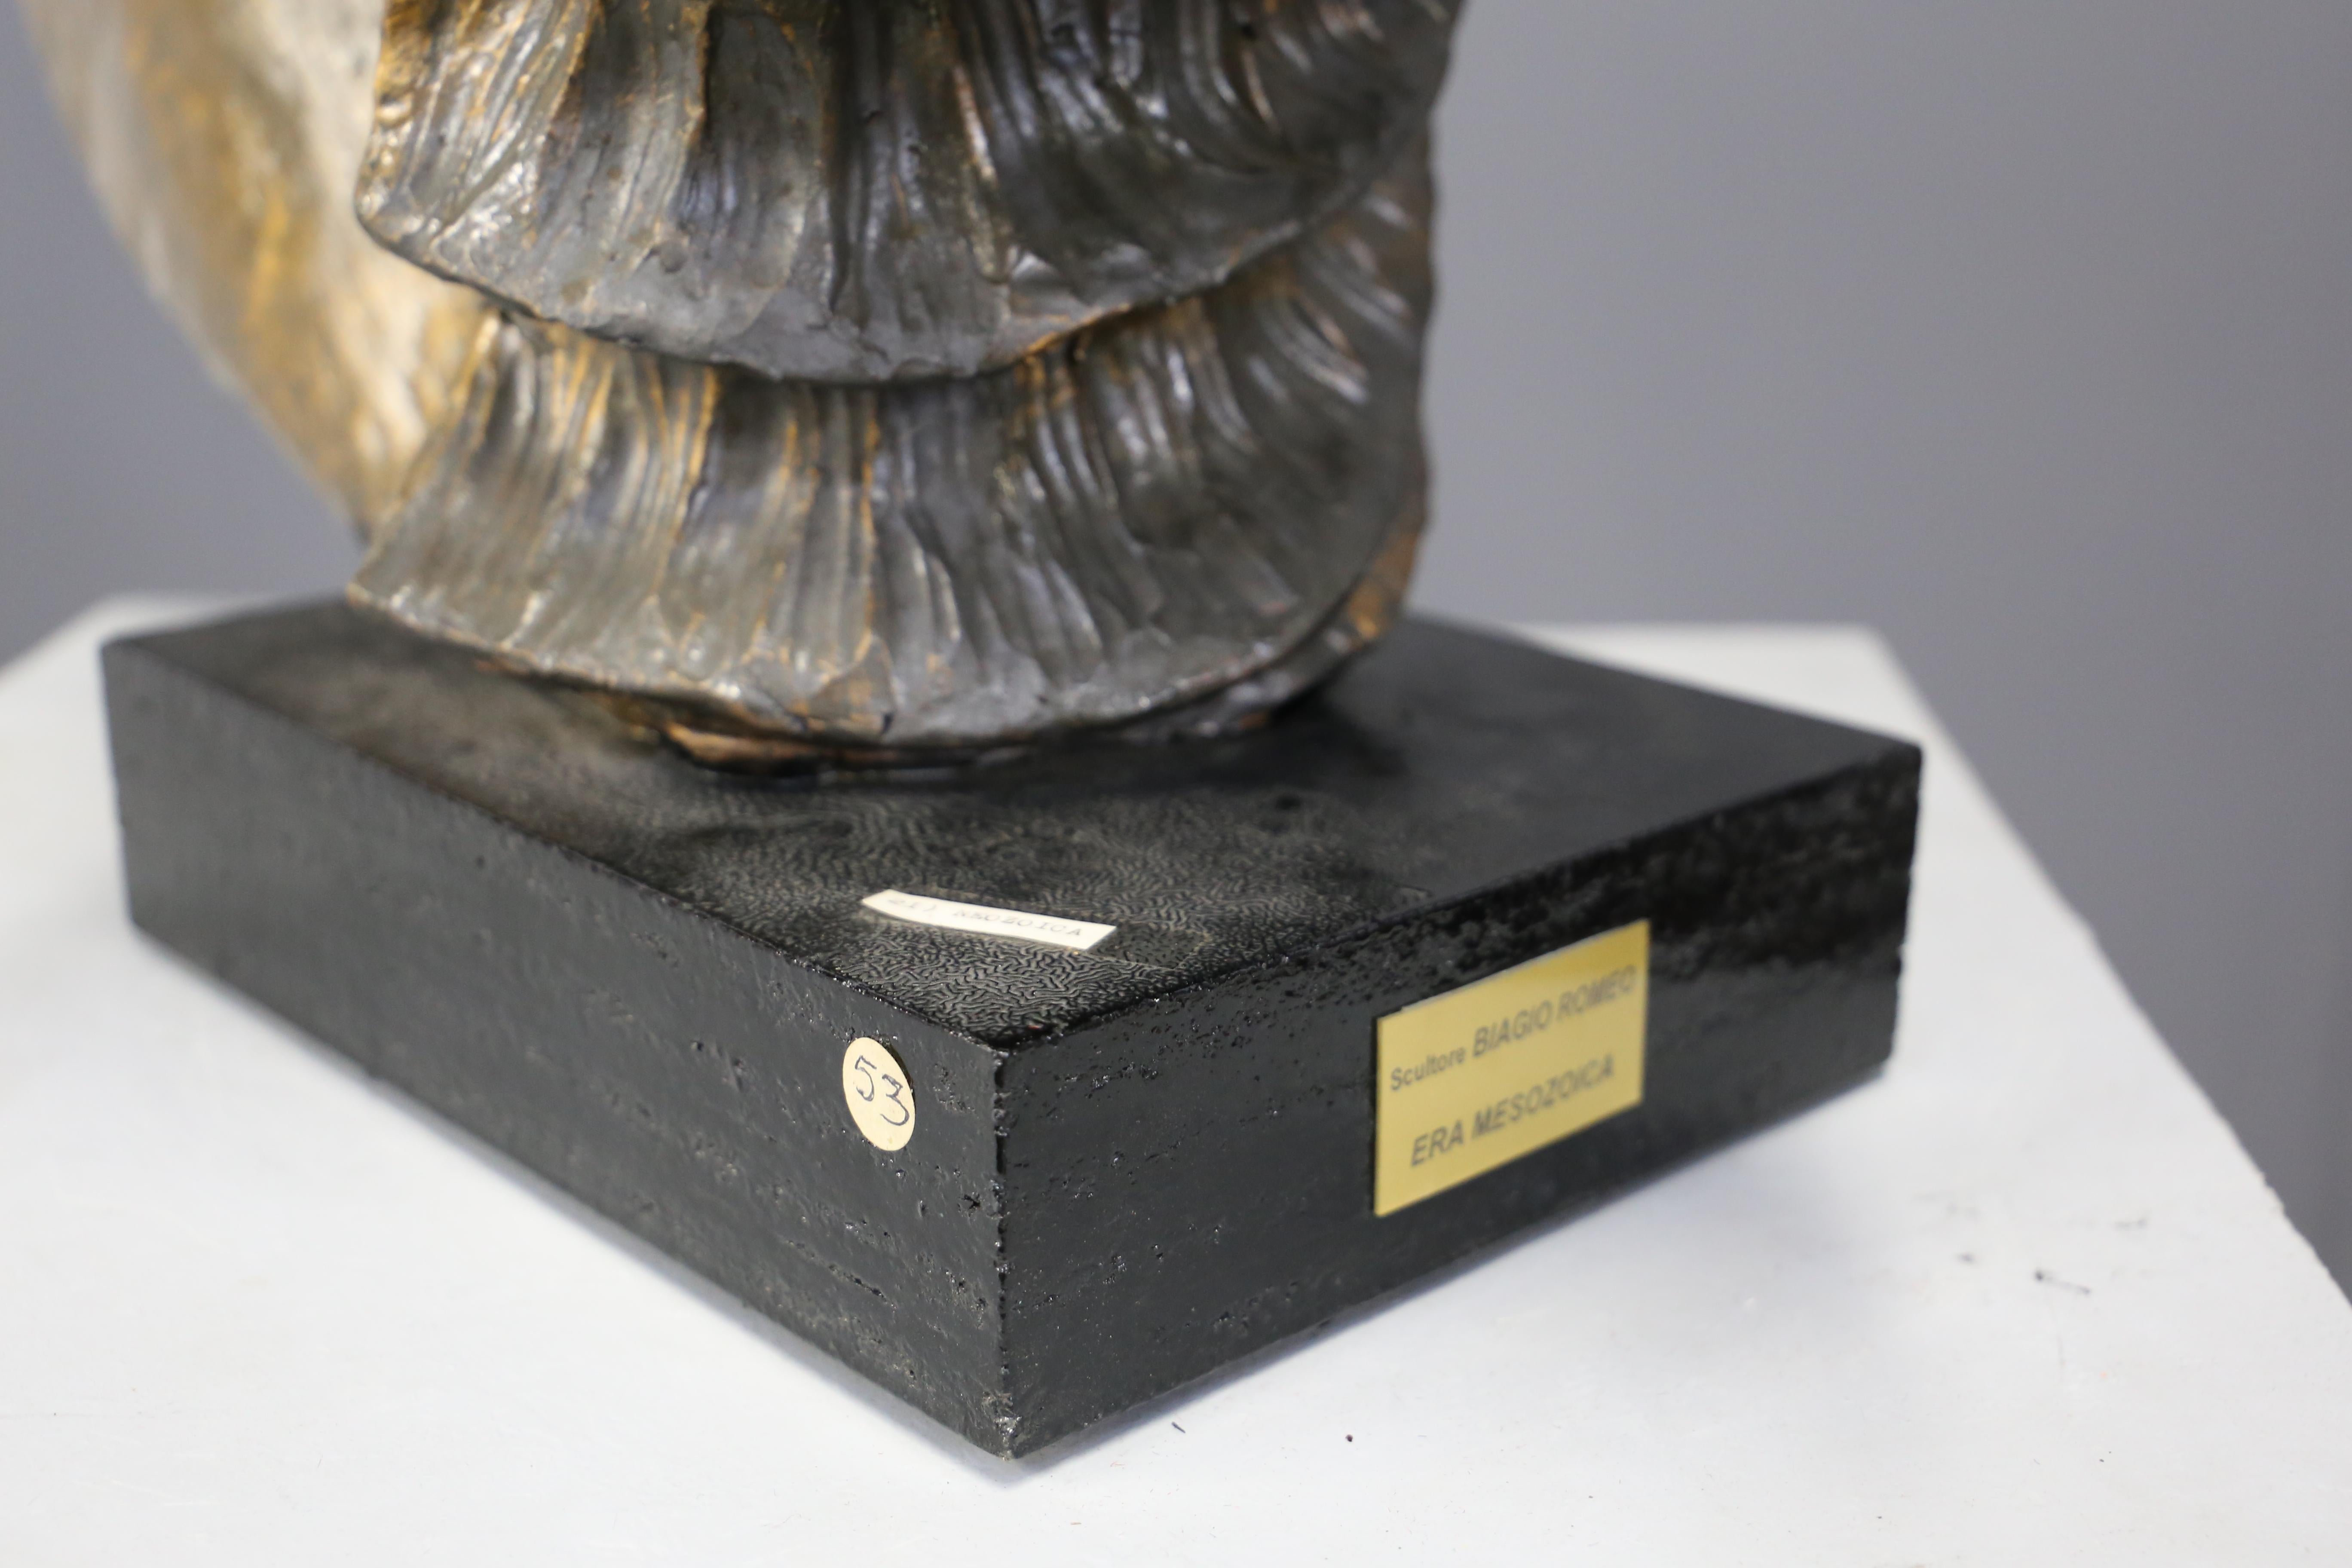 Beautiful bronze and wood sculpture designed in 1995, fine Italian manufacture. Signed.
The base is made of lacquered black wood. This form serves as a pedestal for the actual sculpture.
The main body is a sculpture representing the Mesozoic era,